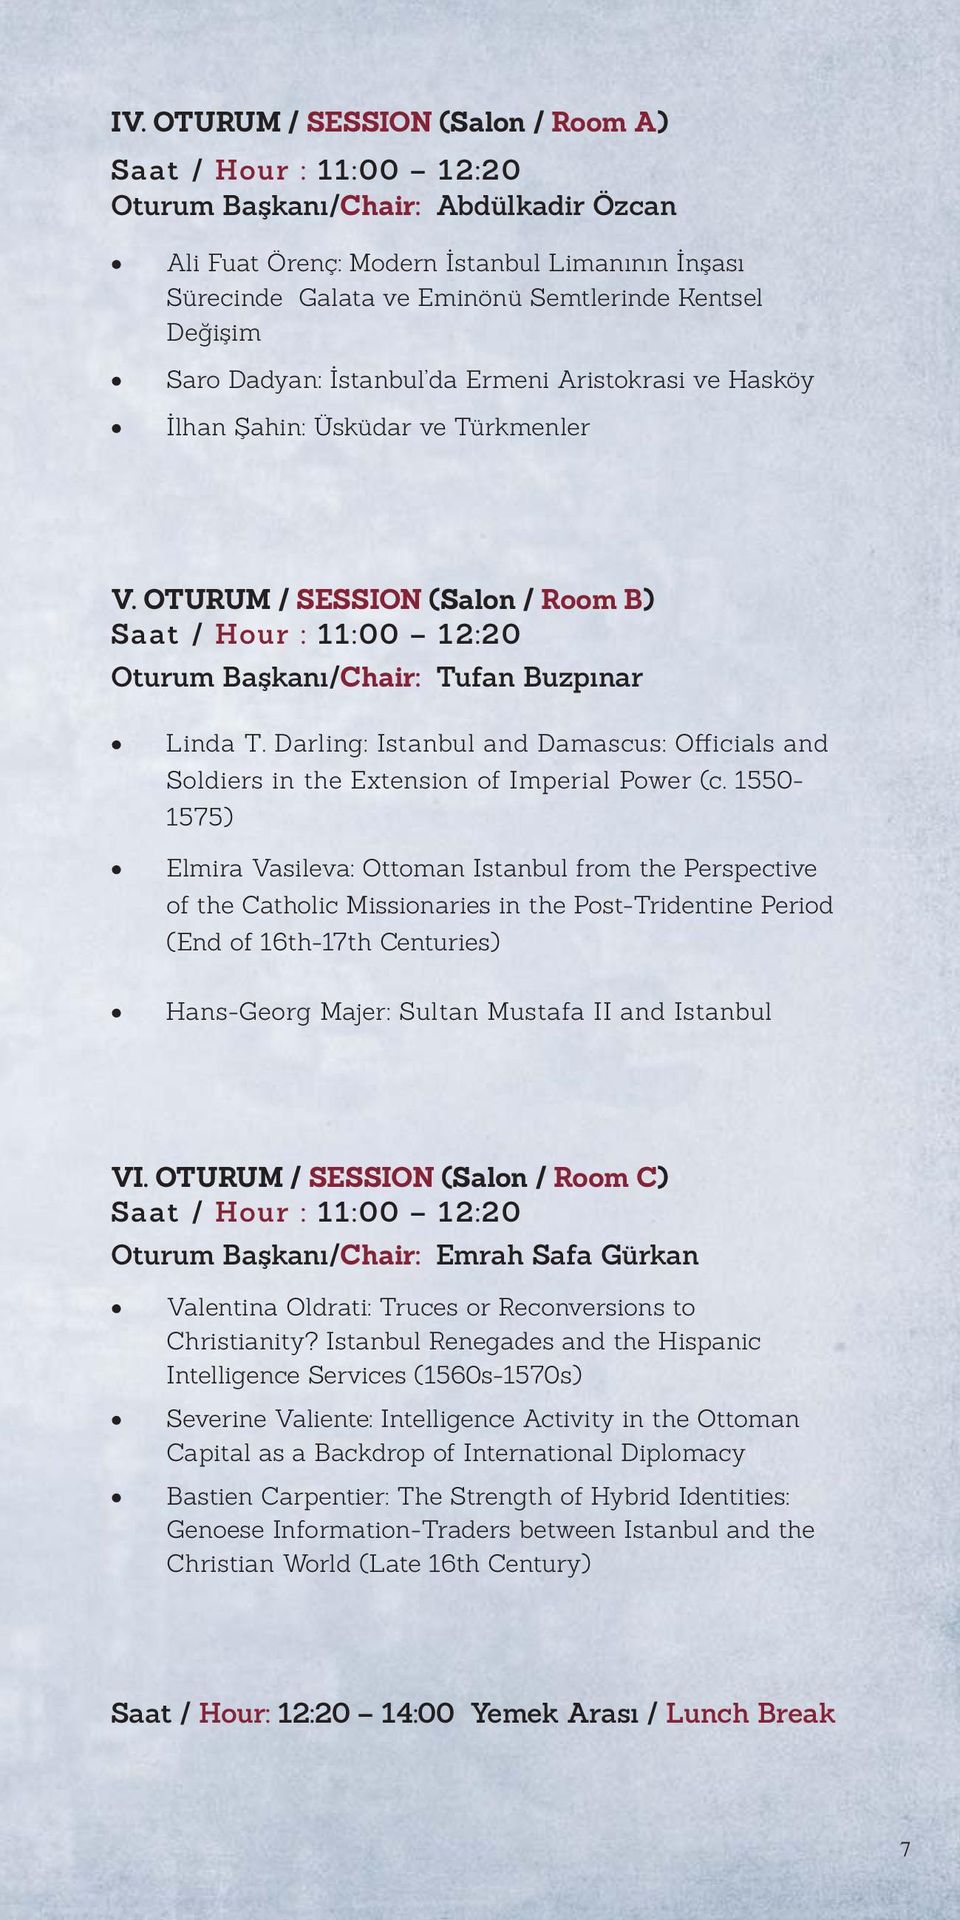 OTURUM / SESSION (Salon / Room B) Saat / Hour : 11:00 12:20 Oturum Başkanı/Chair: Tufan Buzpınar Linda T. Darling: Istanbul and Damascus: Officials and Soldiers in the Extension of Imperial Power (c.